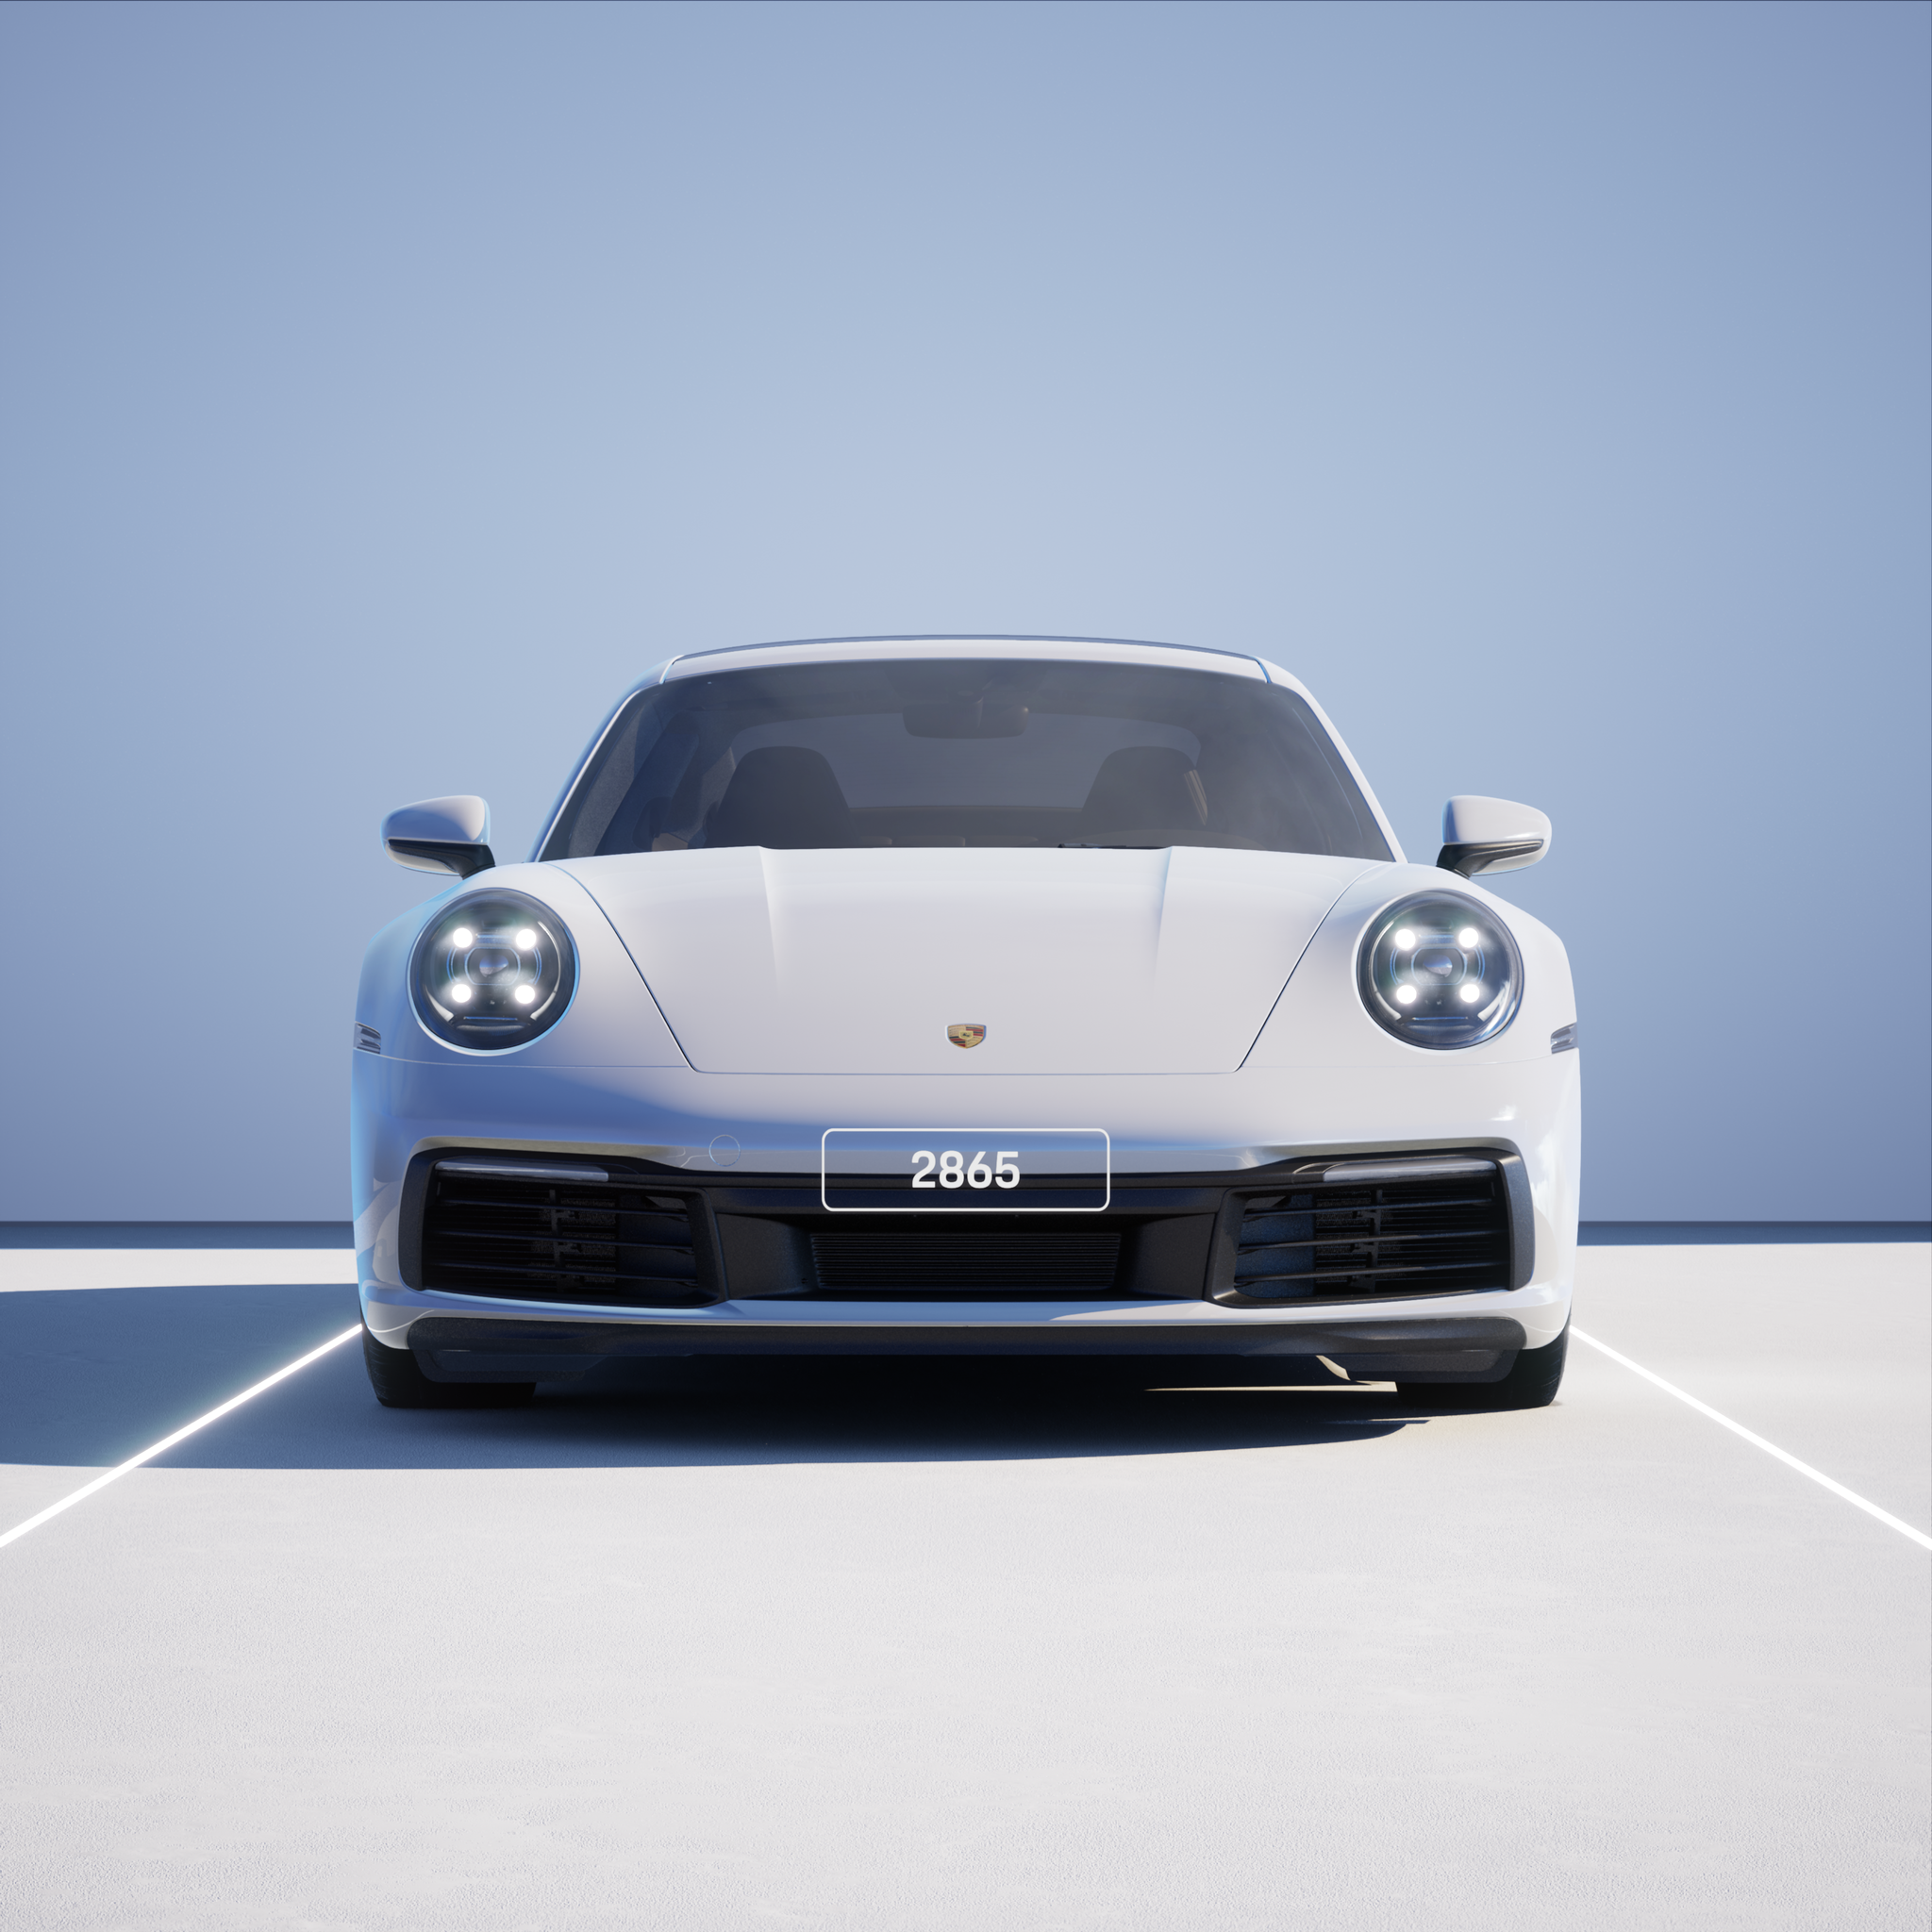 The PORSCHΞ 911 2865 image in phase